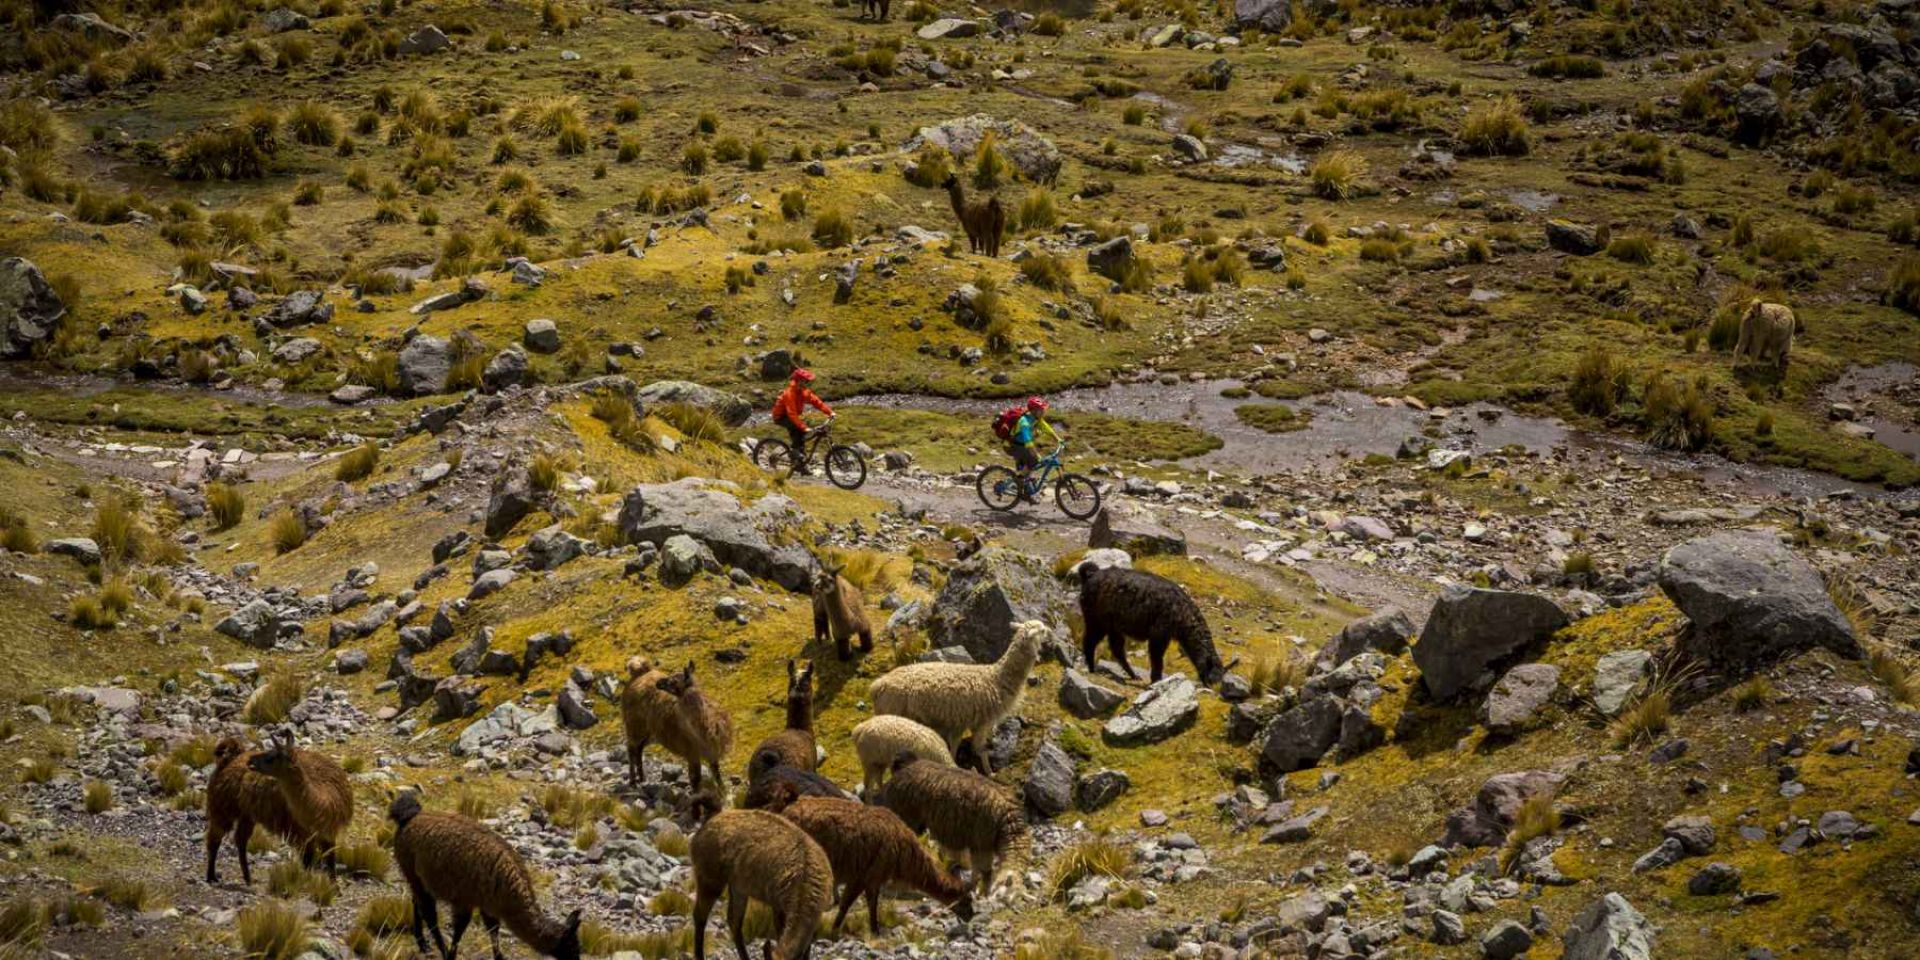 Two cyclists biking Peru on a dirt road that drops away before a huge mountain